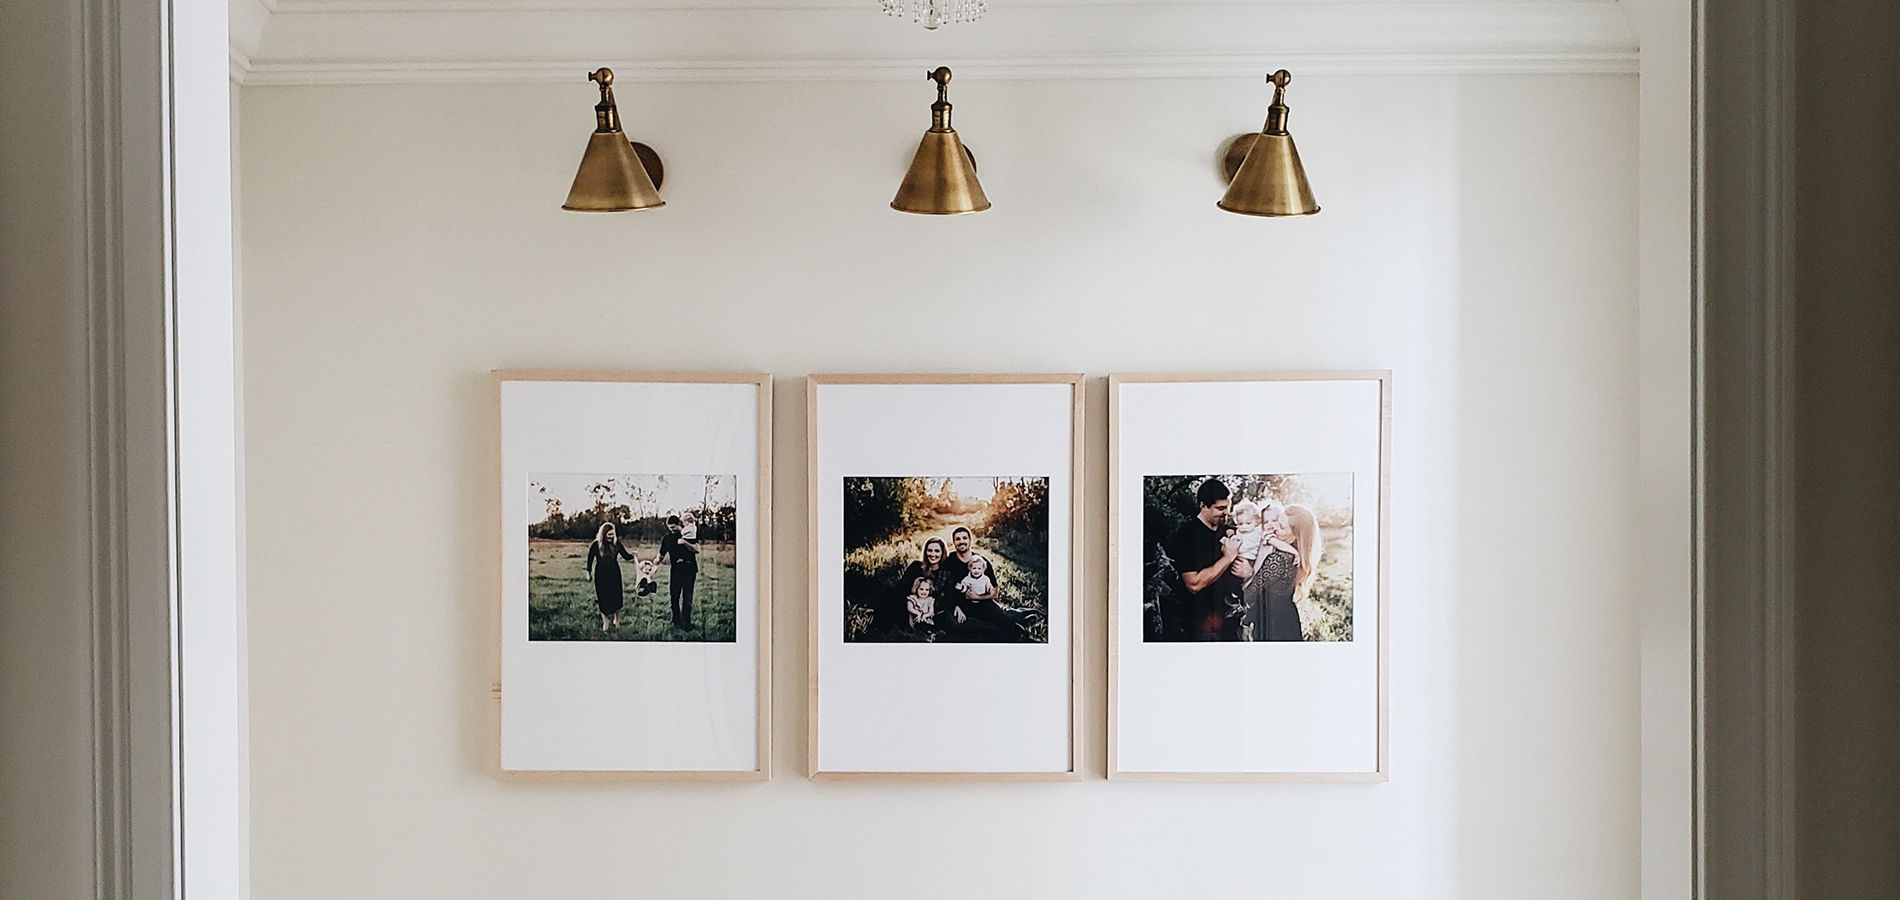 Three large framed family photos hung side by side